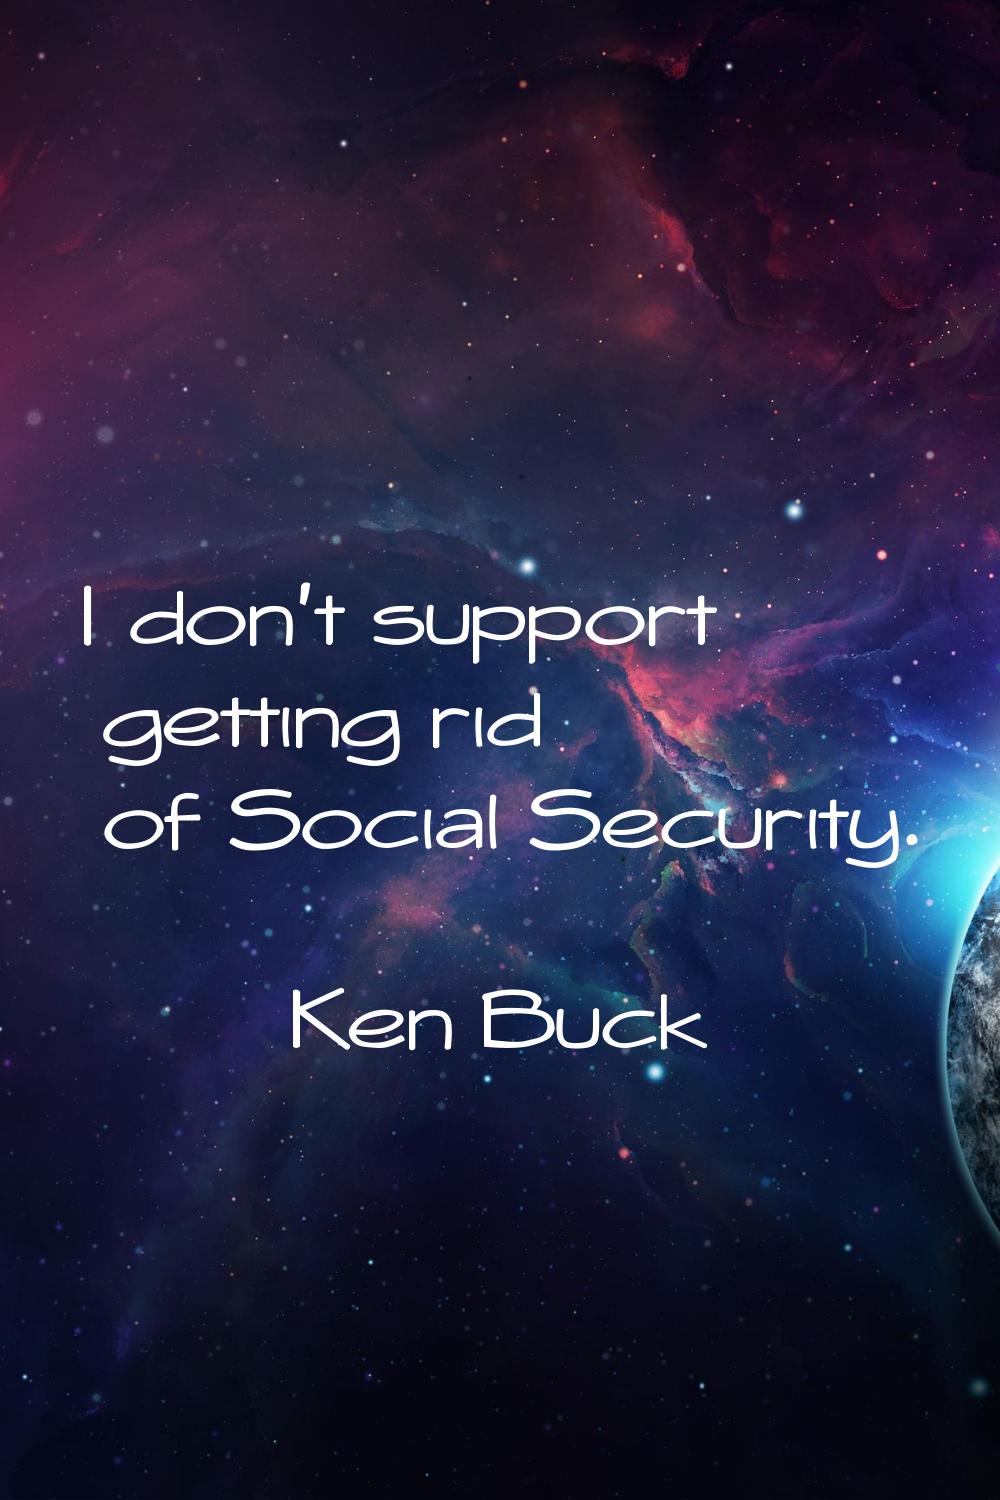 I don't support getting rid of Social Security.